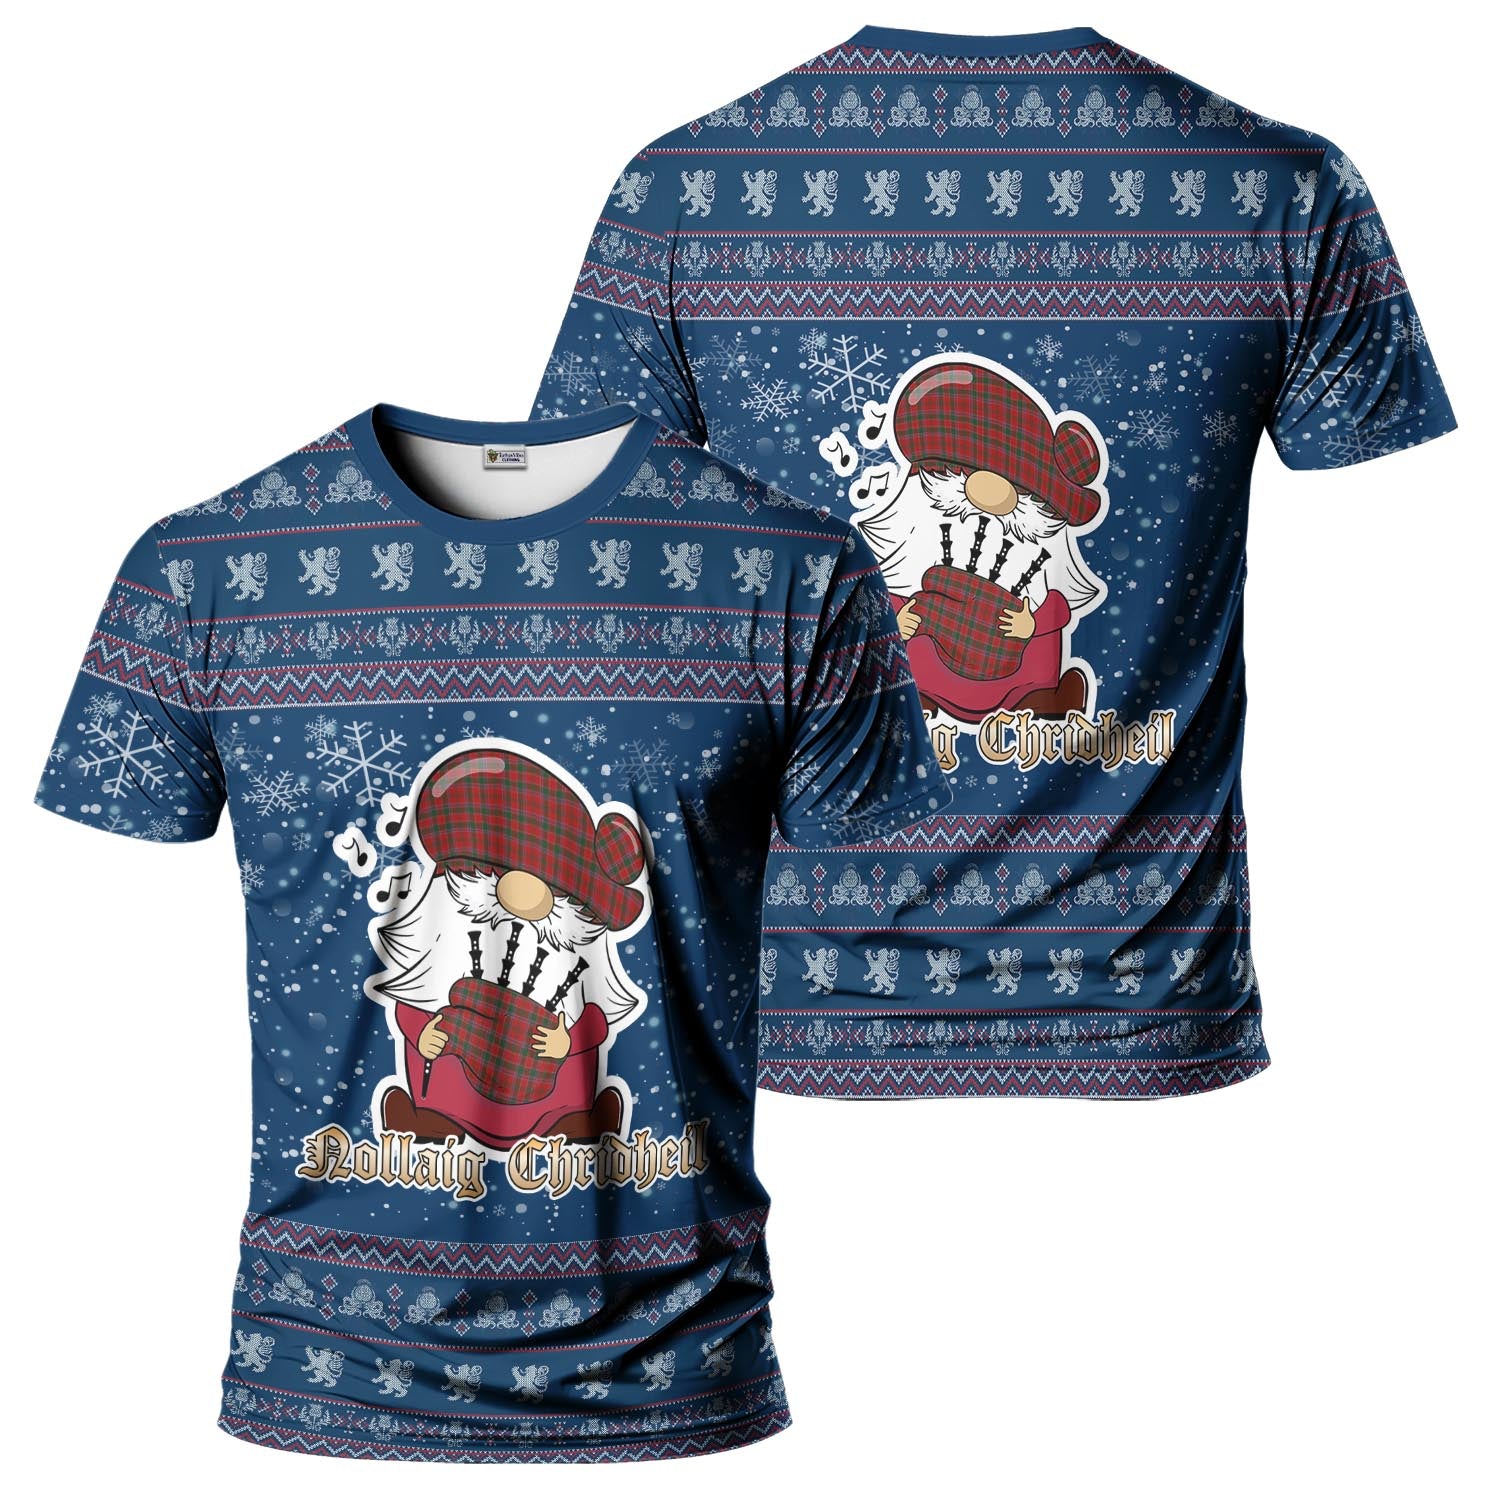 Dalzell (Dalziel) Clan Christmas Family T-Shirt with Funny Gnome Playing Bagpipes Kid's Shirt Blue - Tartanvibesclothing